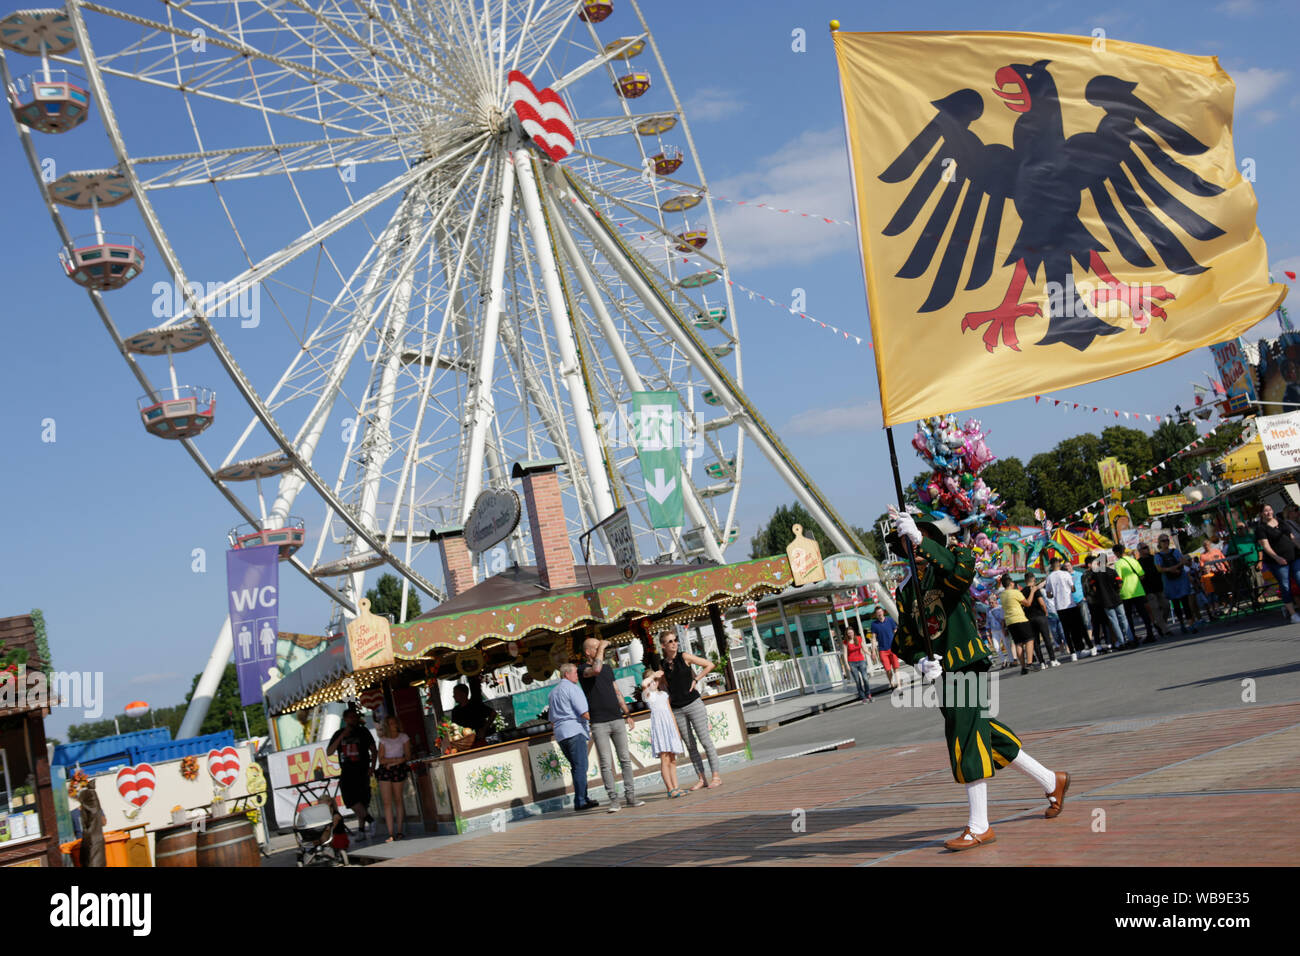 Worms, Germany. 24th August 2019. A colour guard from the Fanfare Corps of the city of Worms marches past a Ferris wheel. The largest wine and funfair along the river Rhine, the Backfischfest started in Worms with the traditional handing over of power from the Lord Mayor to the mayor of the fishermen’s lea. The ceremony was framed by dances and music. Stock Photo